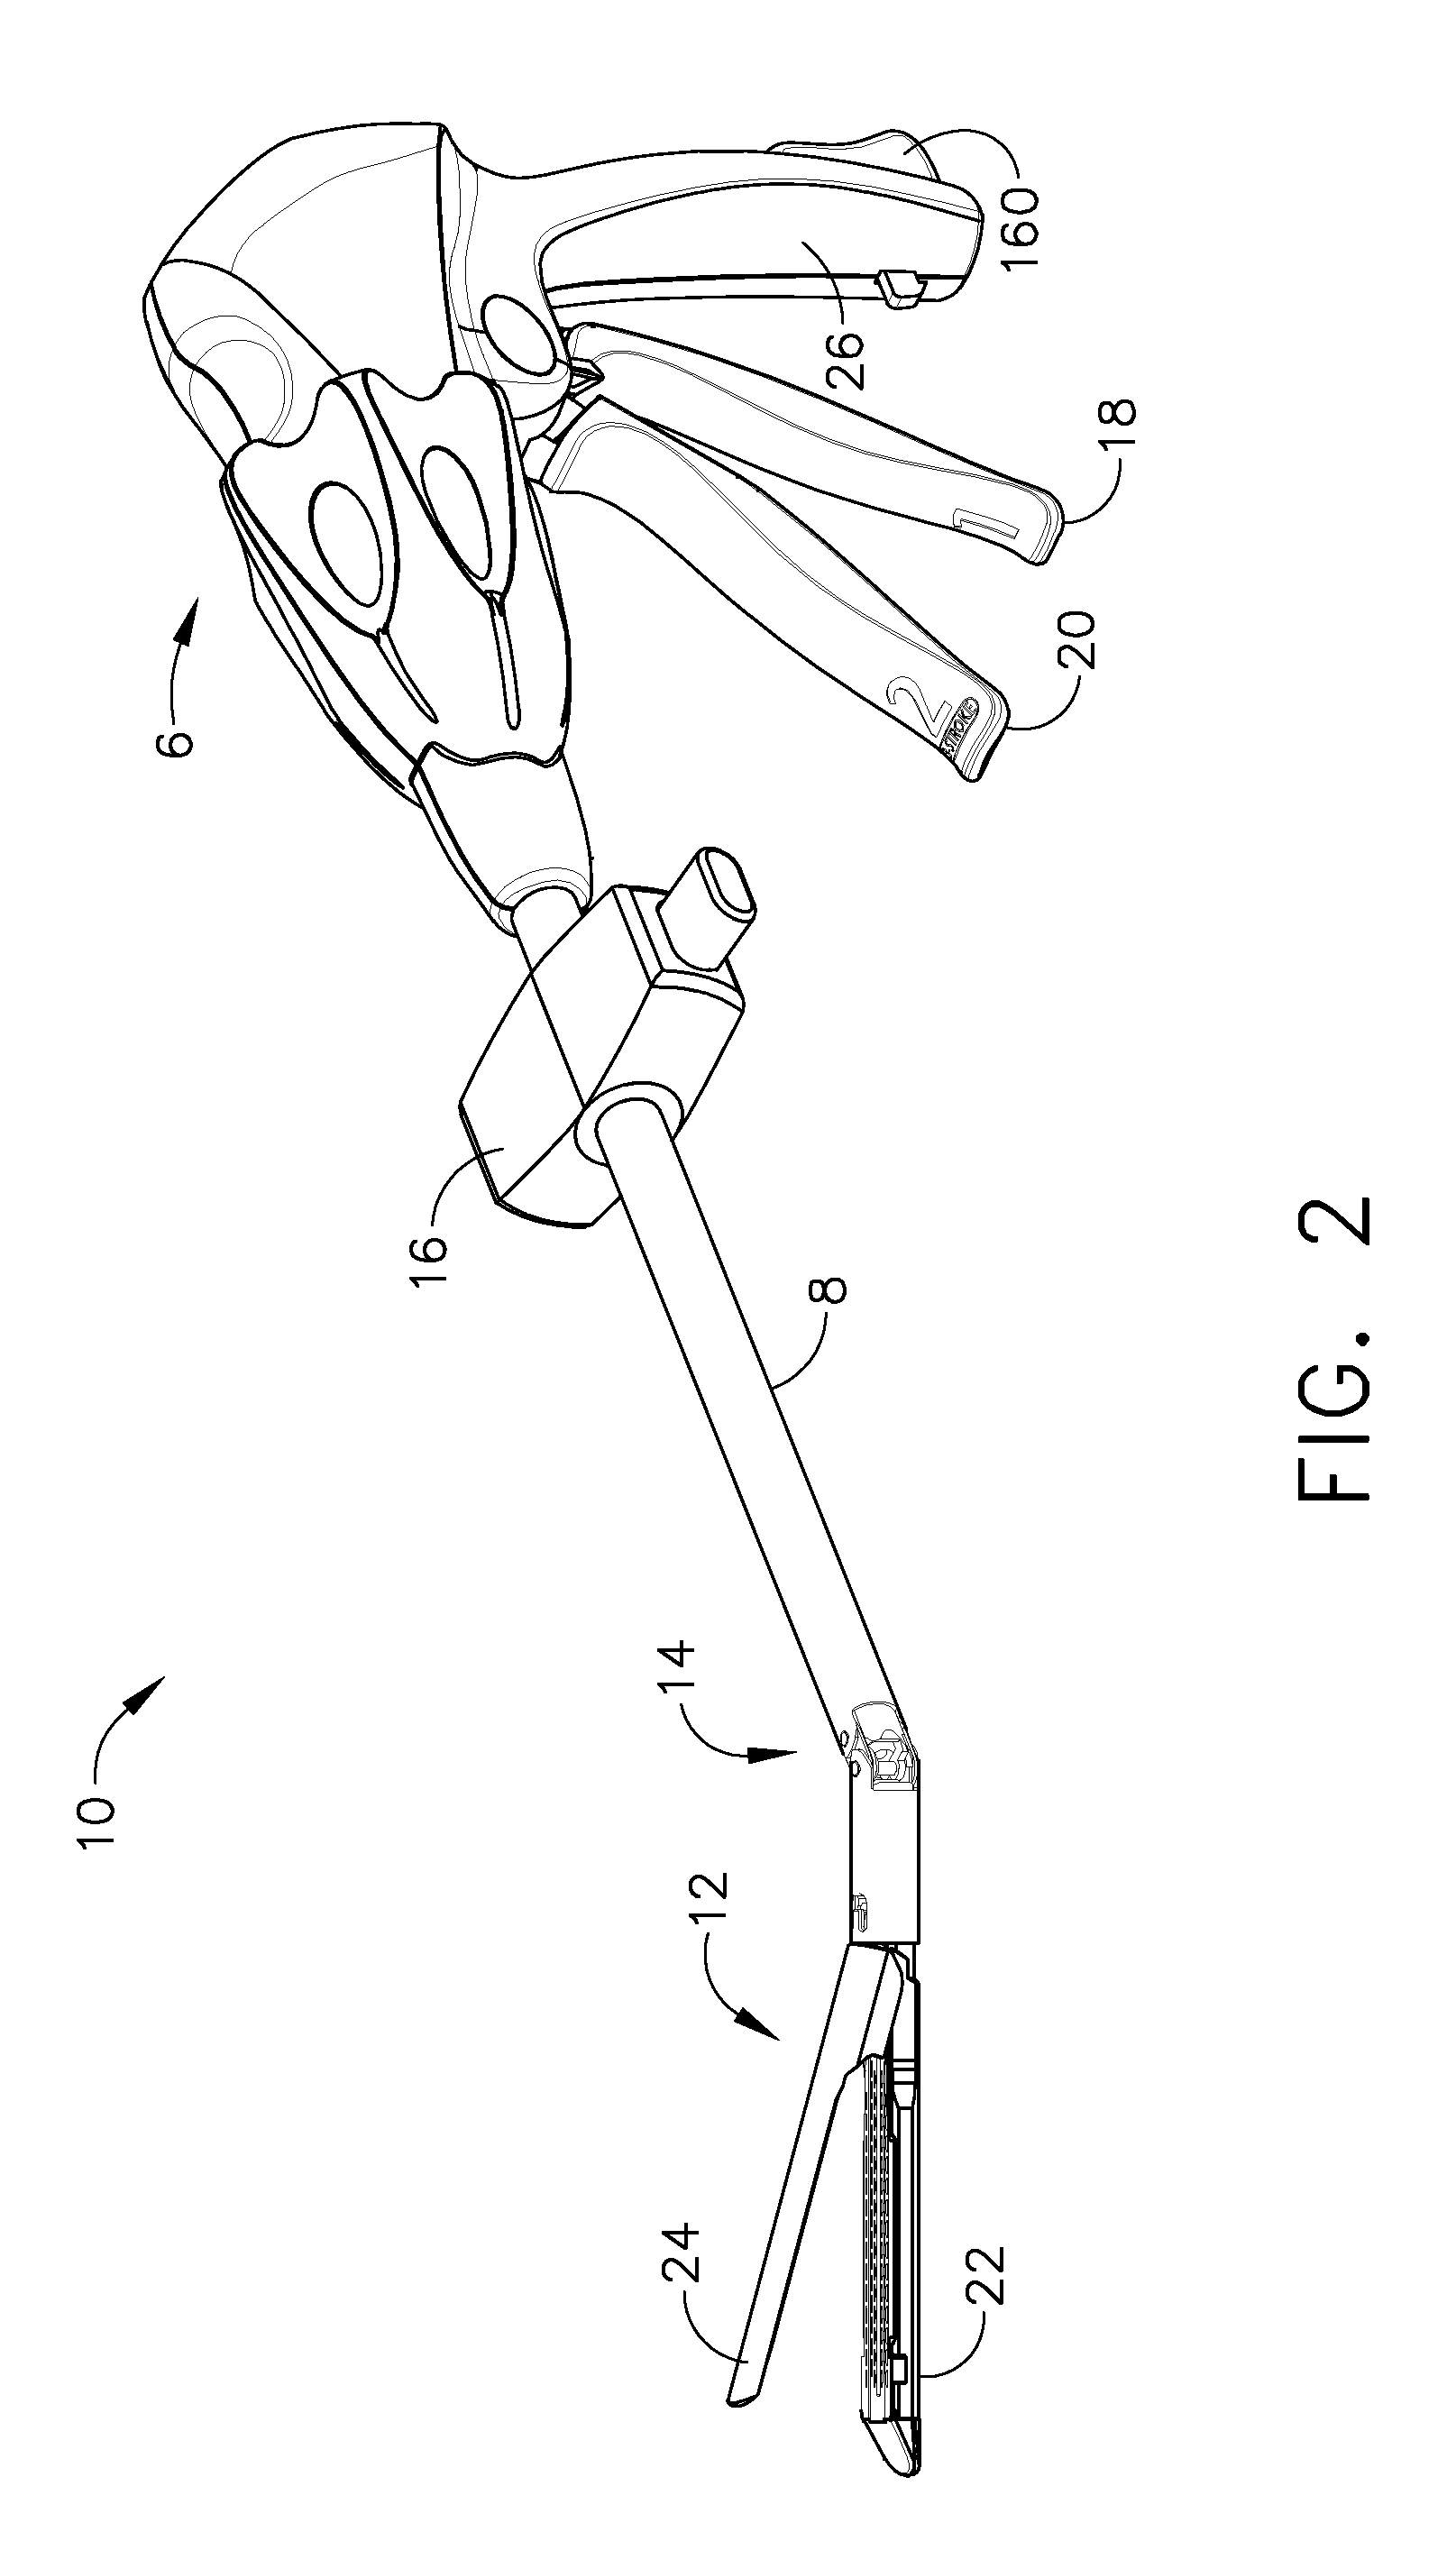 Powered surgical cutting and stapling apparatus with manually retractable firing system